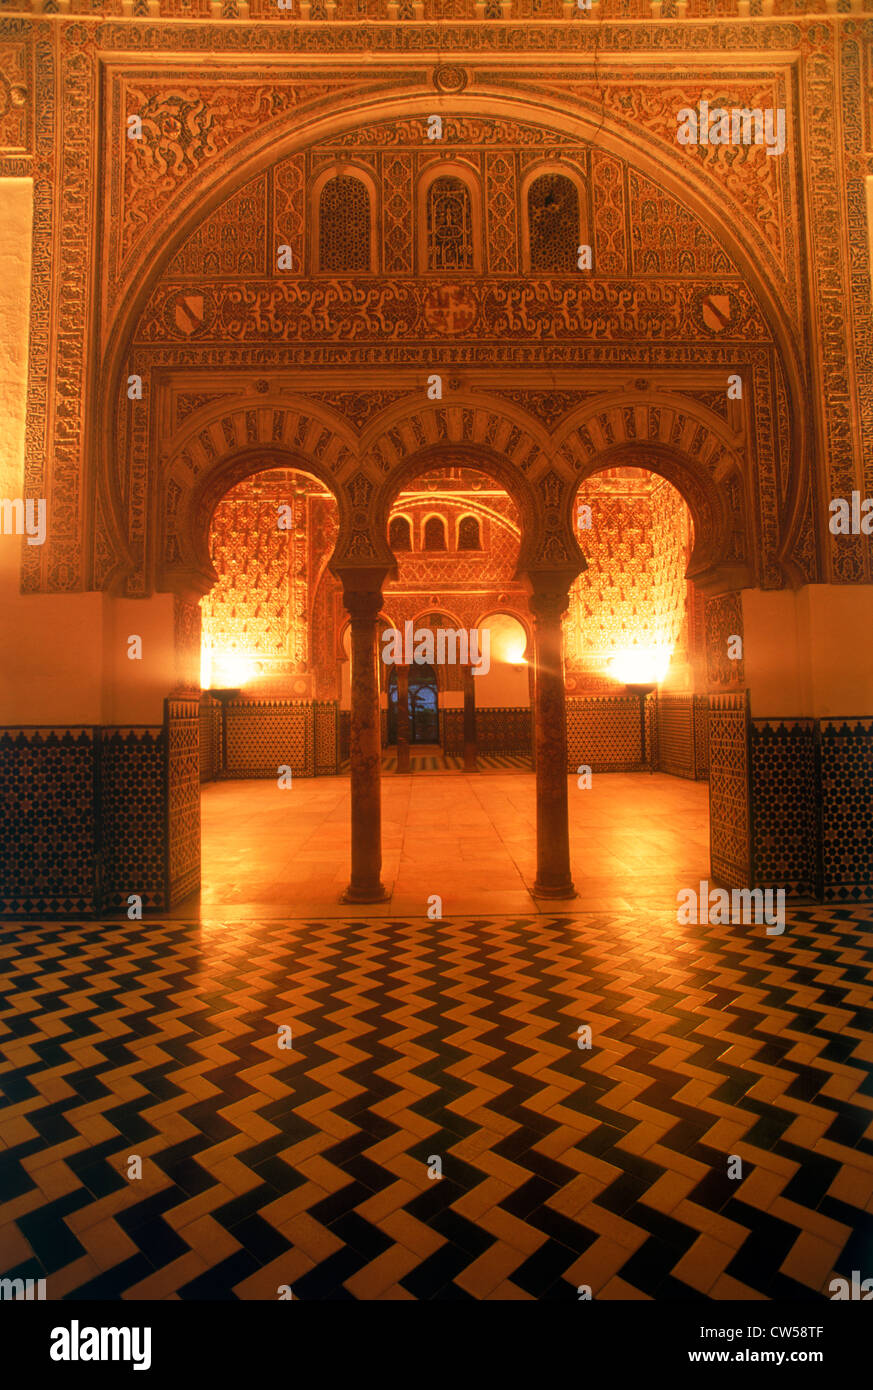 Almohad-Gothic style rooms and courtyards of Alcazar Palace in Seville Stock Photo